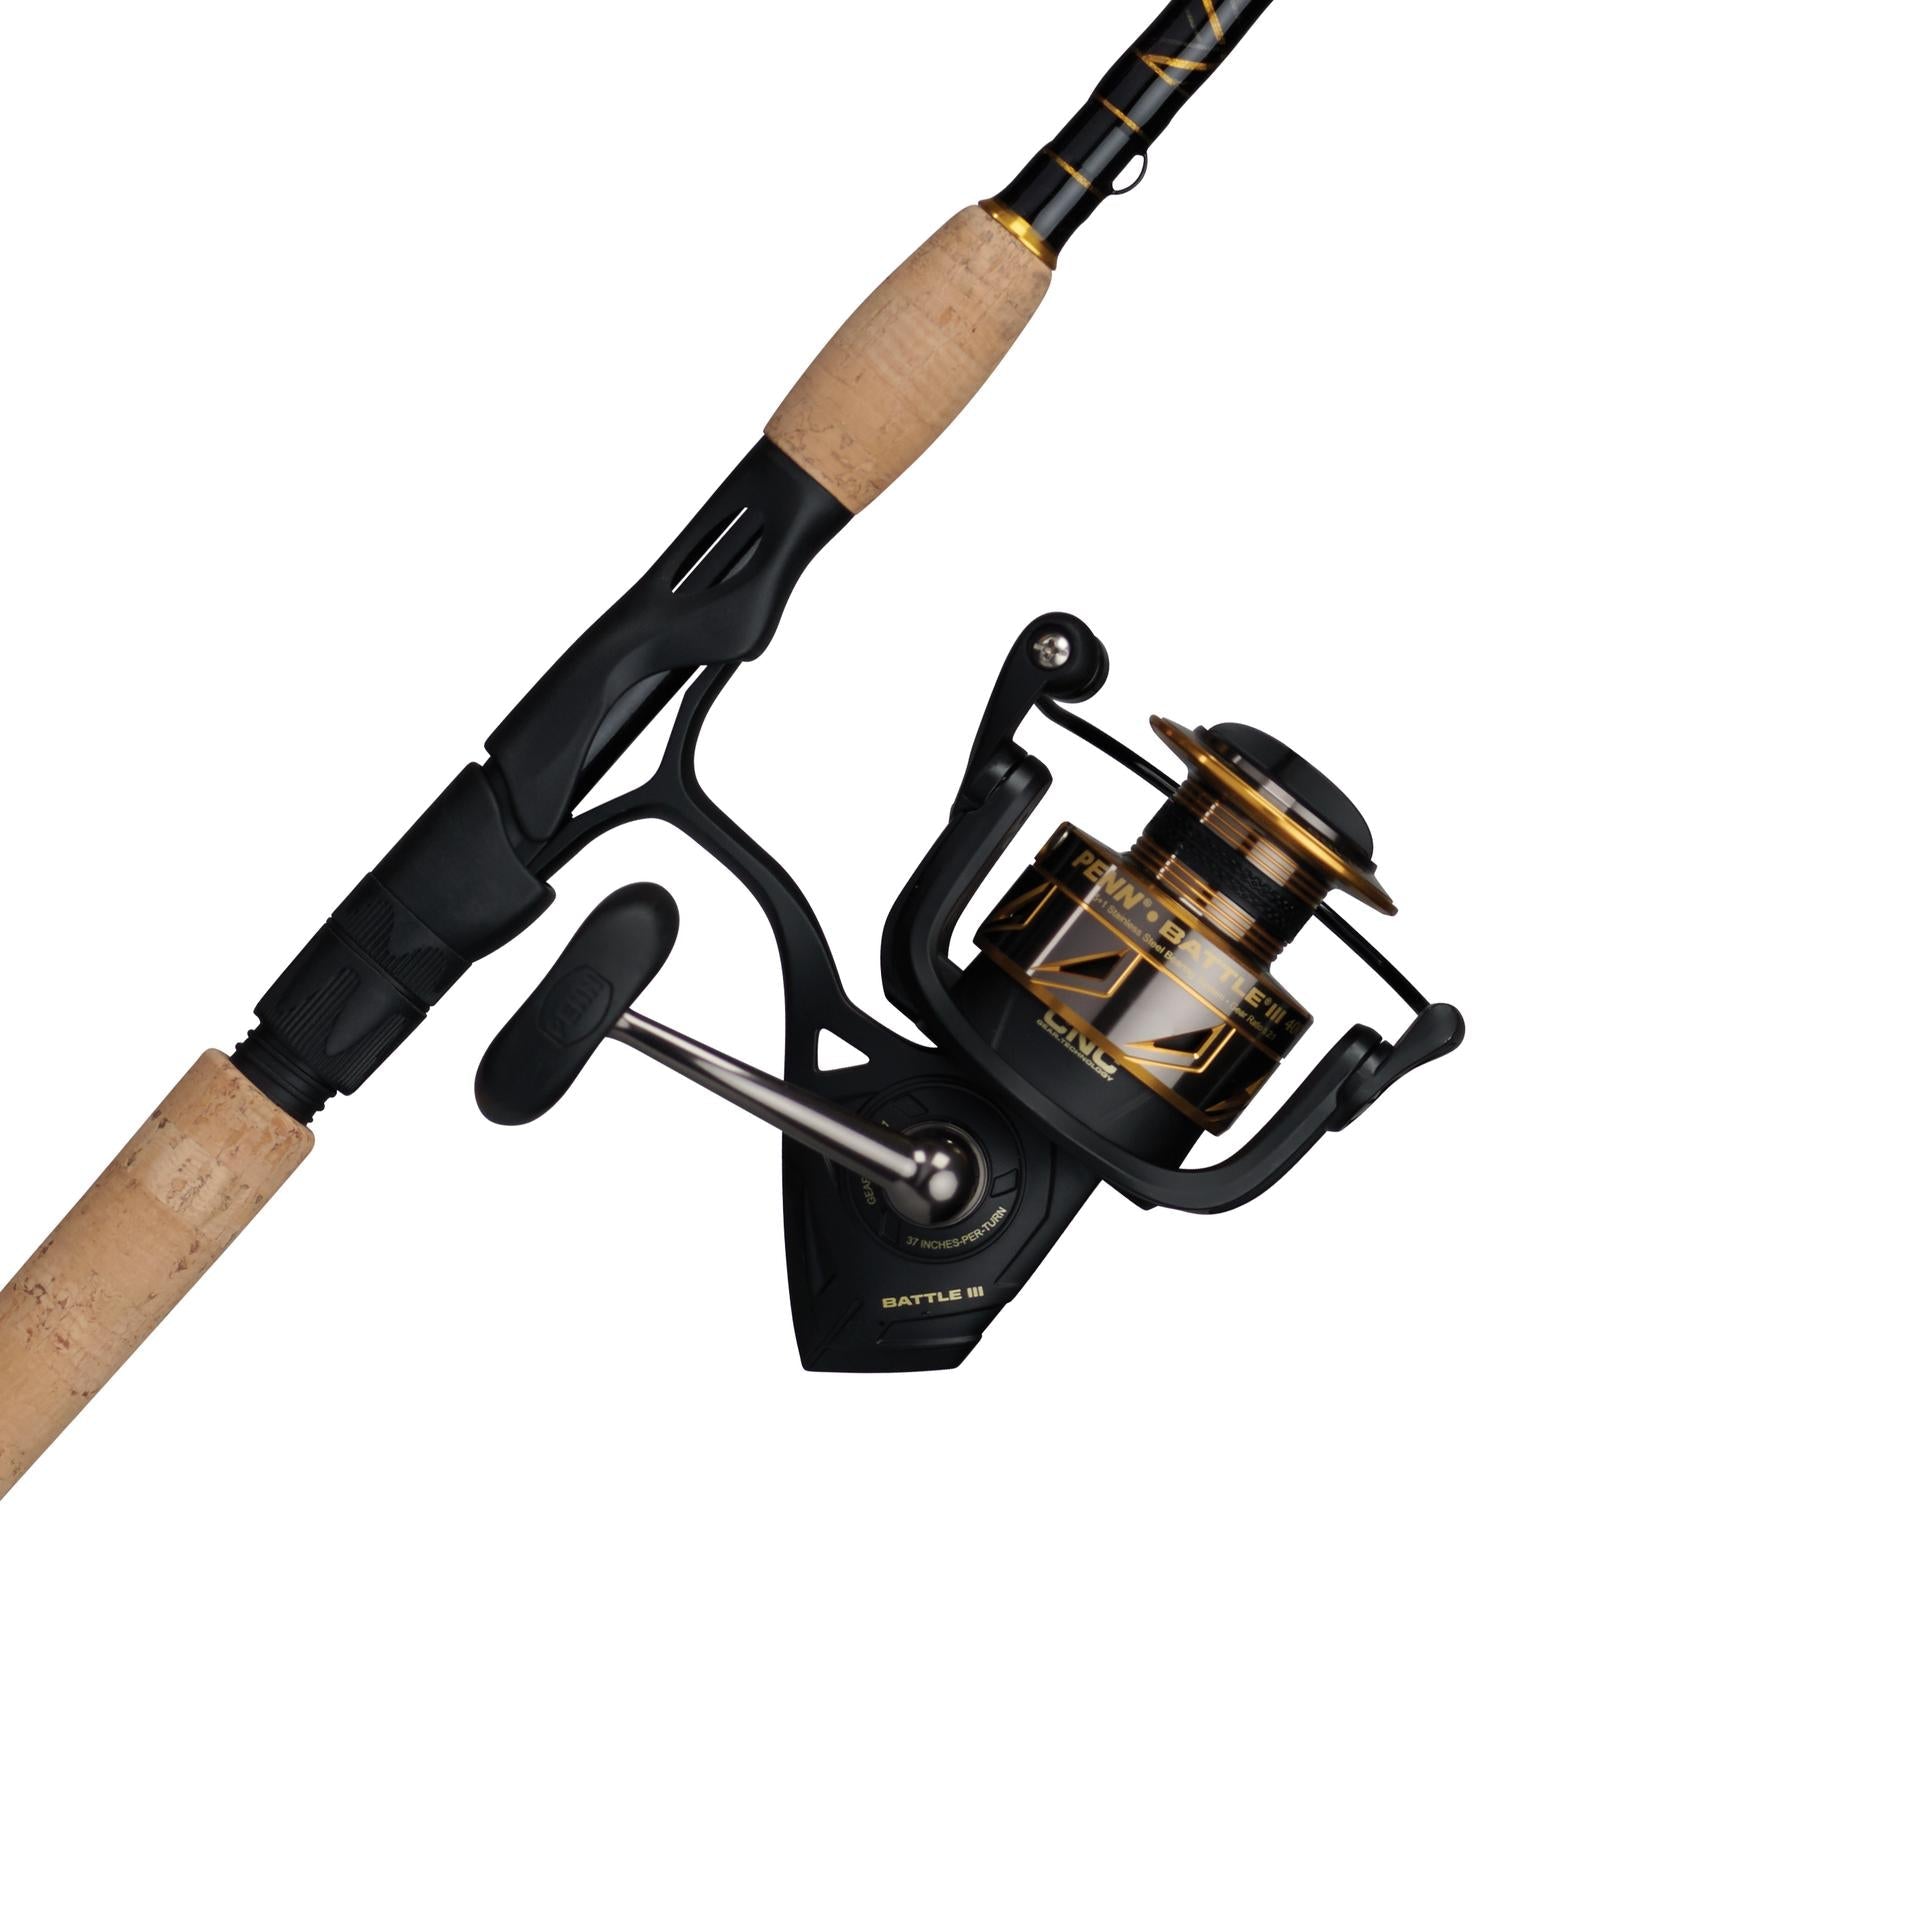  PENN Fishing Battle Fly Reel and Fishing Rod Outfit Combo,  Black, 10wt (BTLFLY10WT90) : Sports & Outdoors